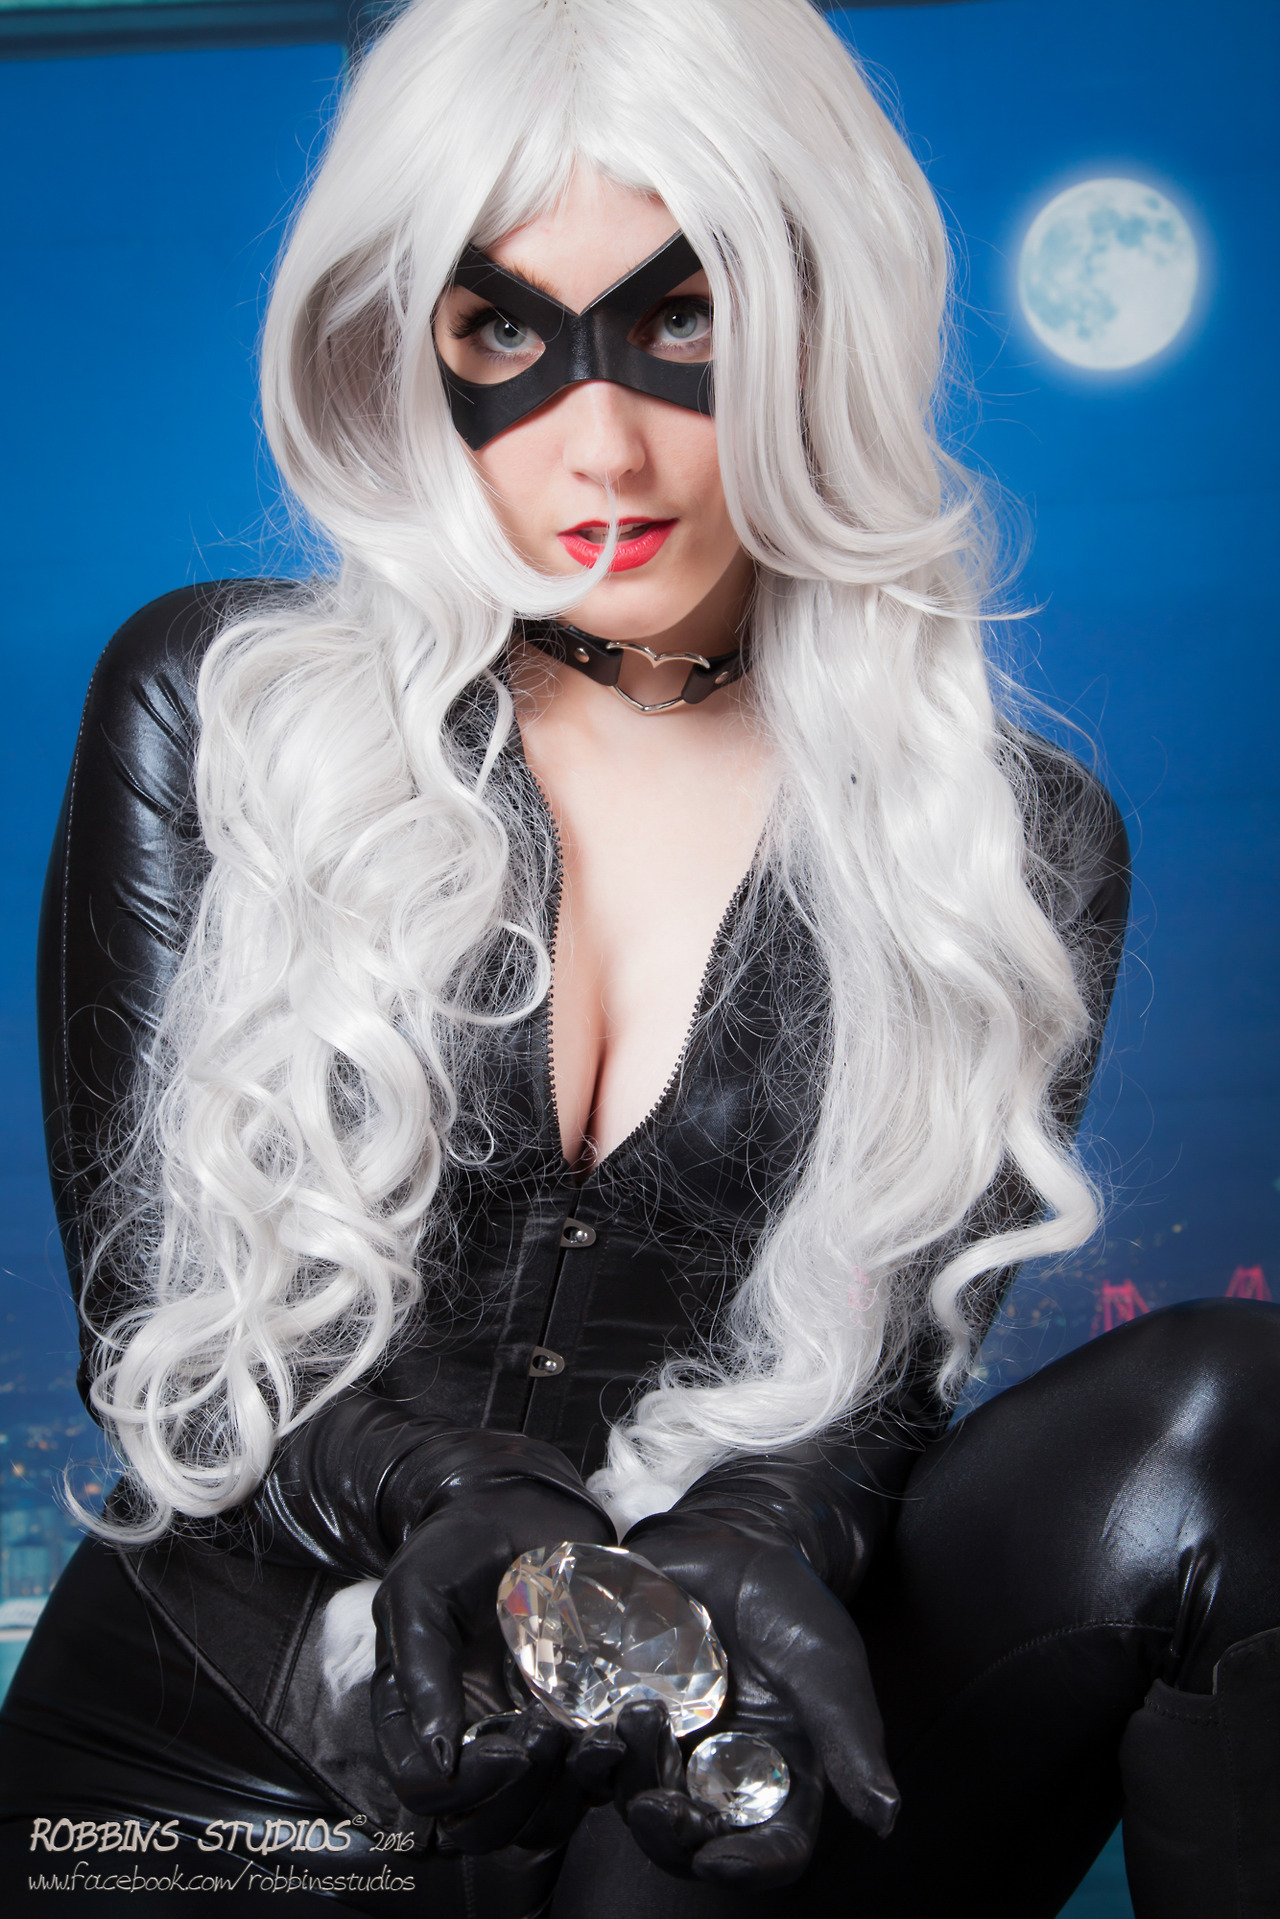 from my old black cat set, I did a really bad job on the mask, the wig is a shake-n-go